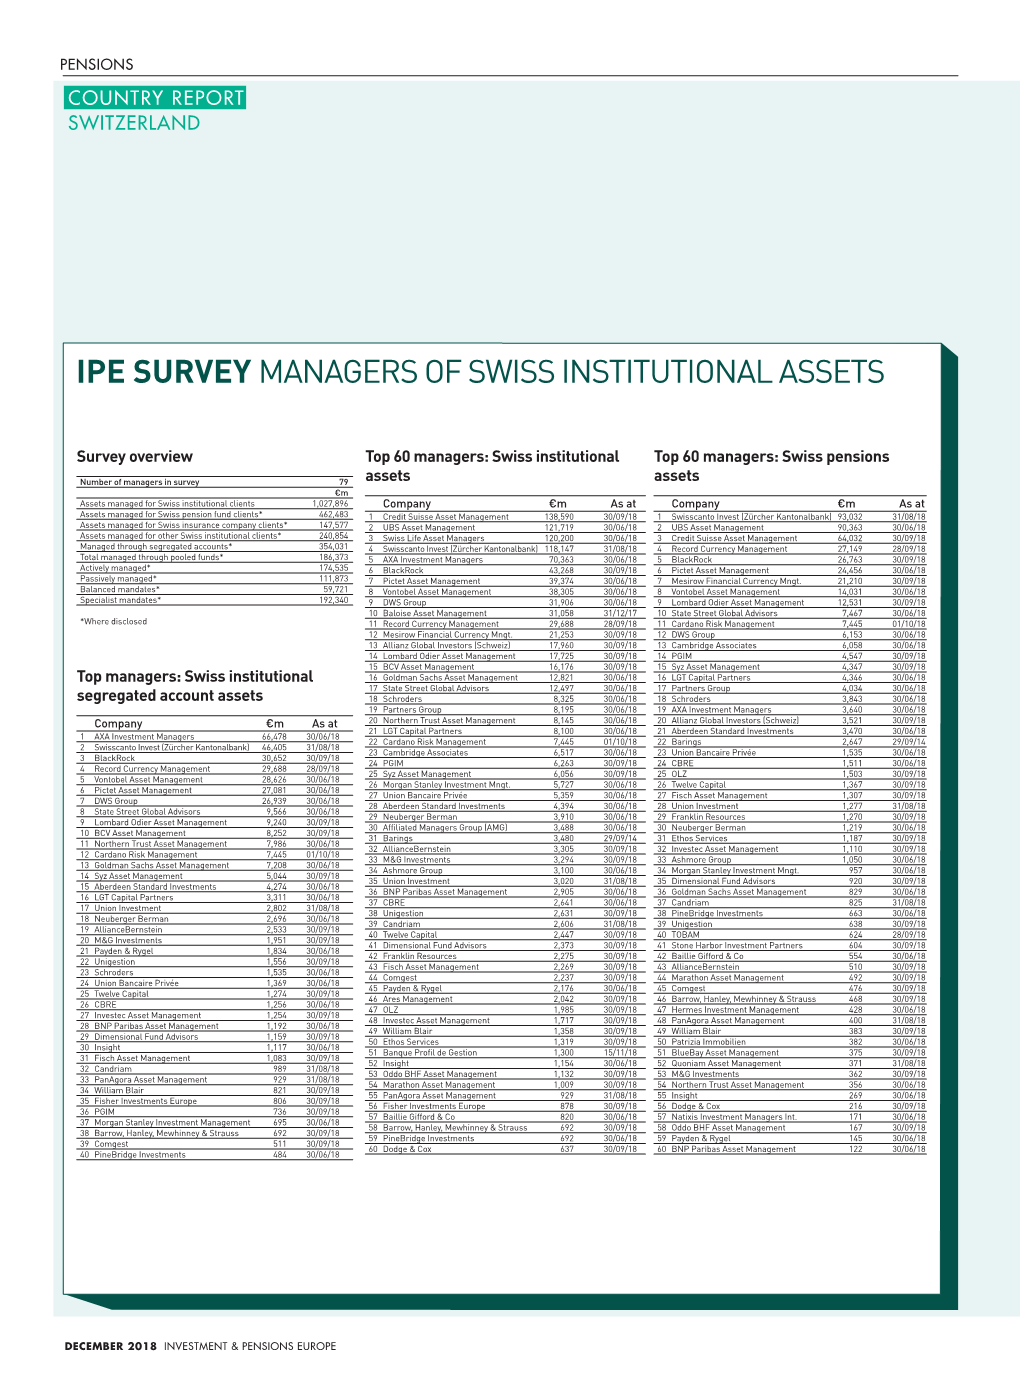 Ipe Survey Managers of Swiss Institutional Assets